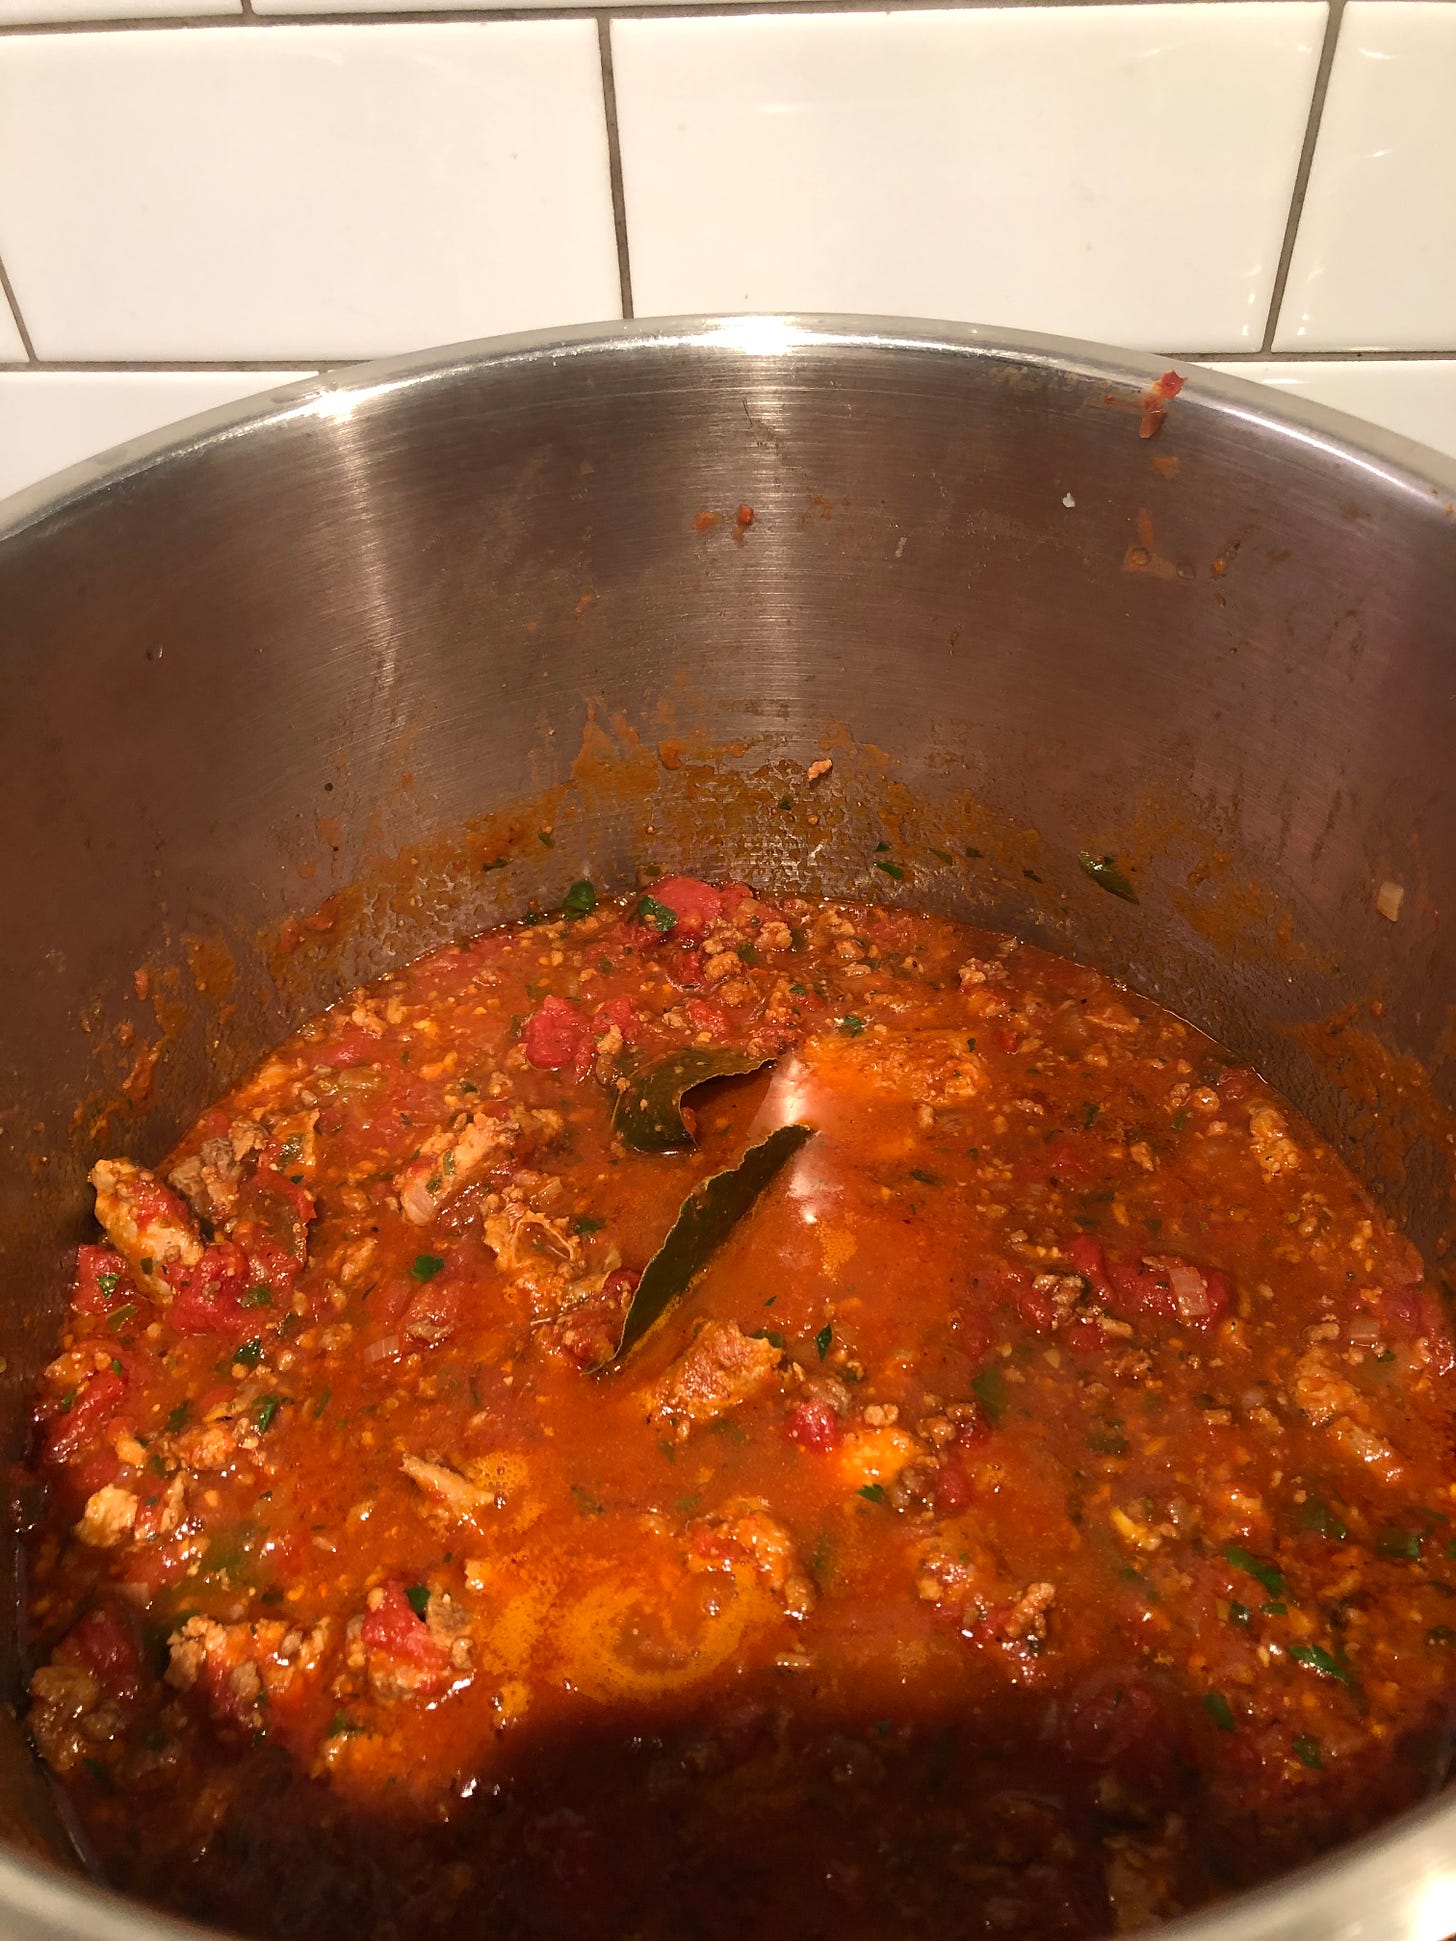 The pot of finished sauce.